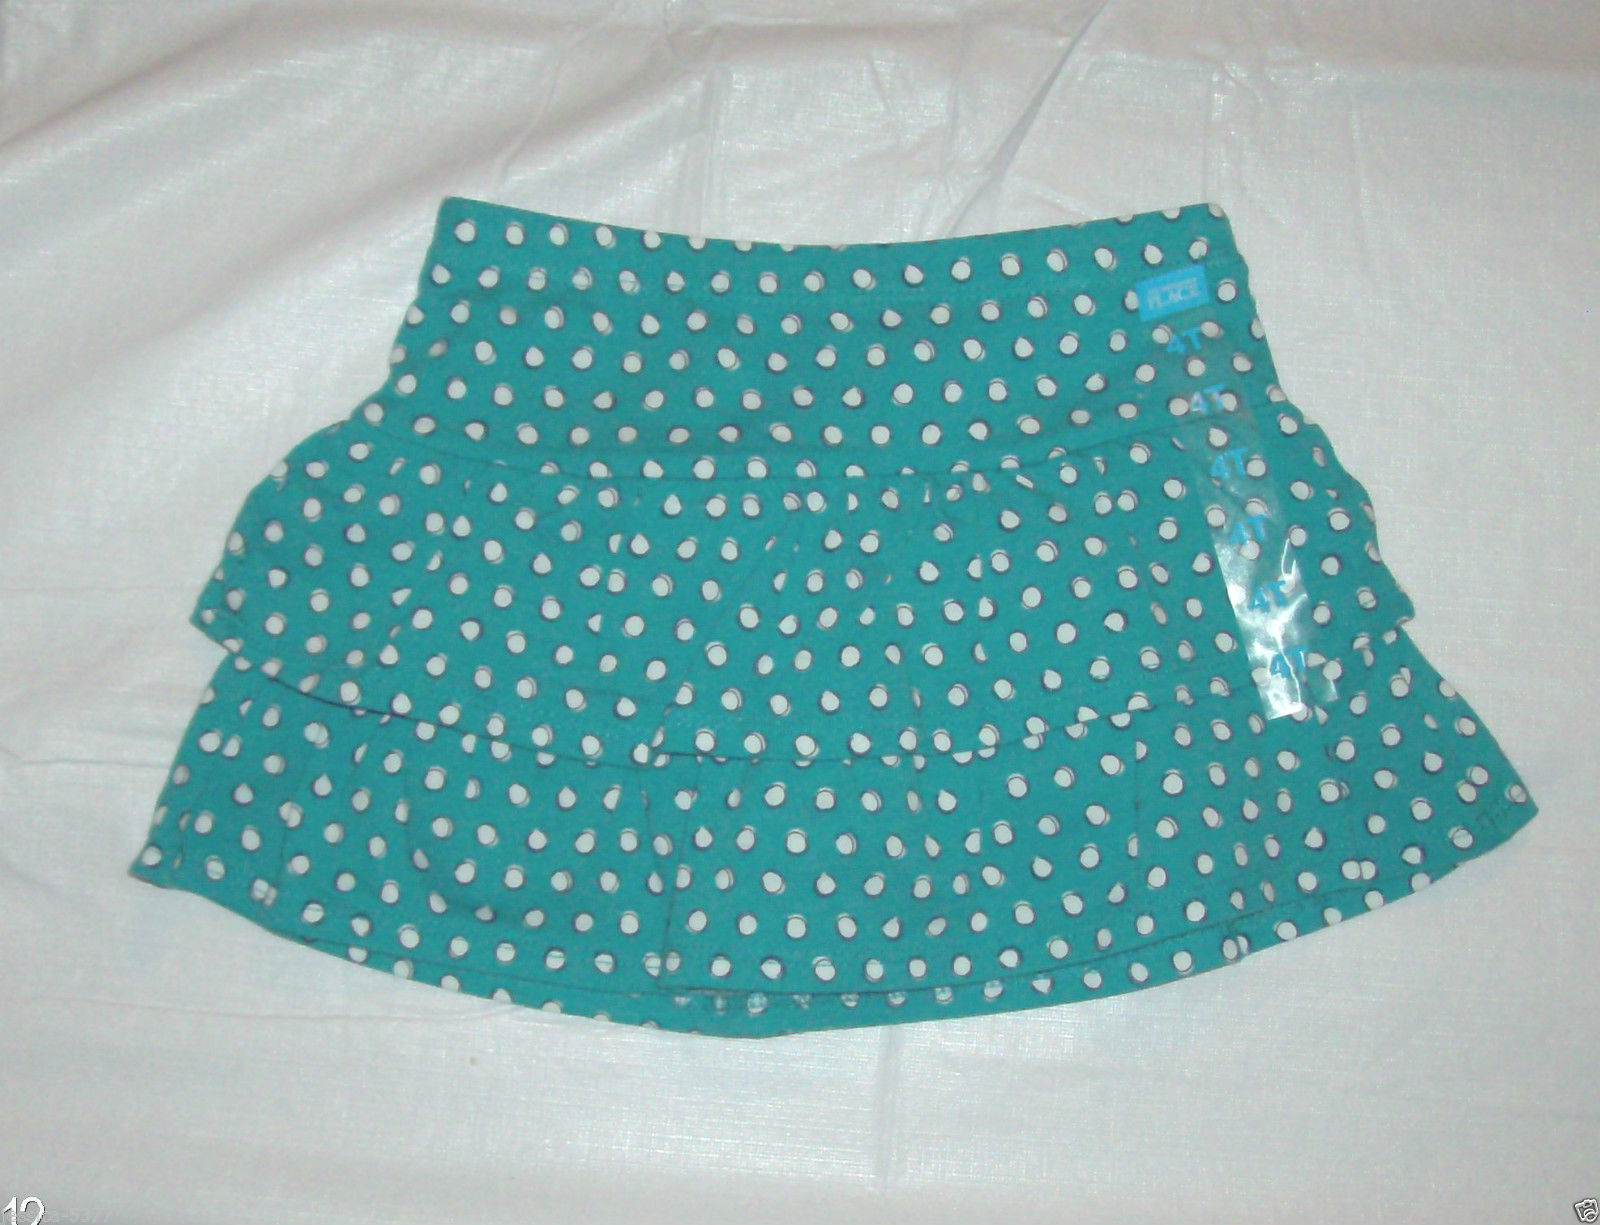 Primary image for Infant Girls Childrens Place Skort Blue with Polka Dots Sz 6-9M 18-24M 4T NWT